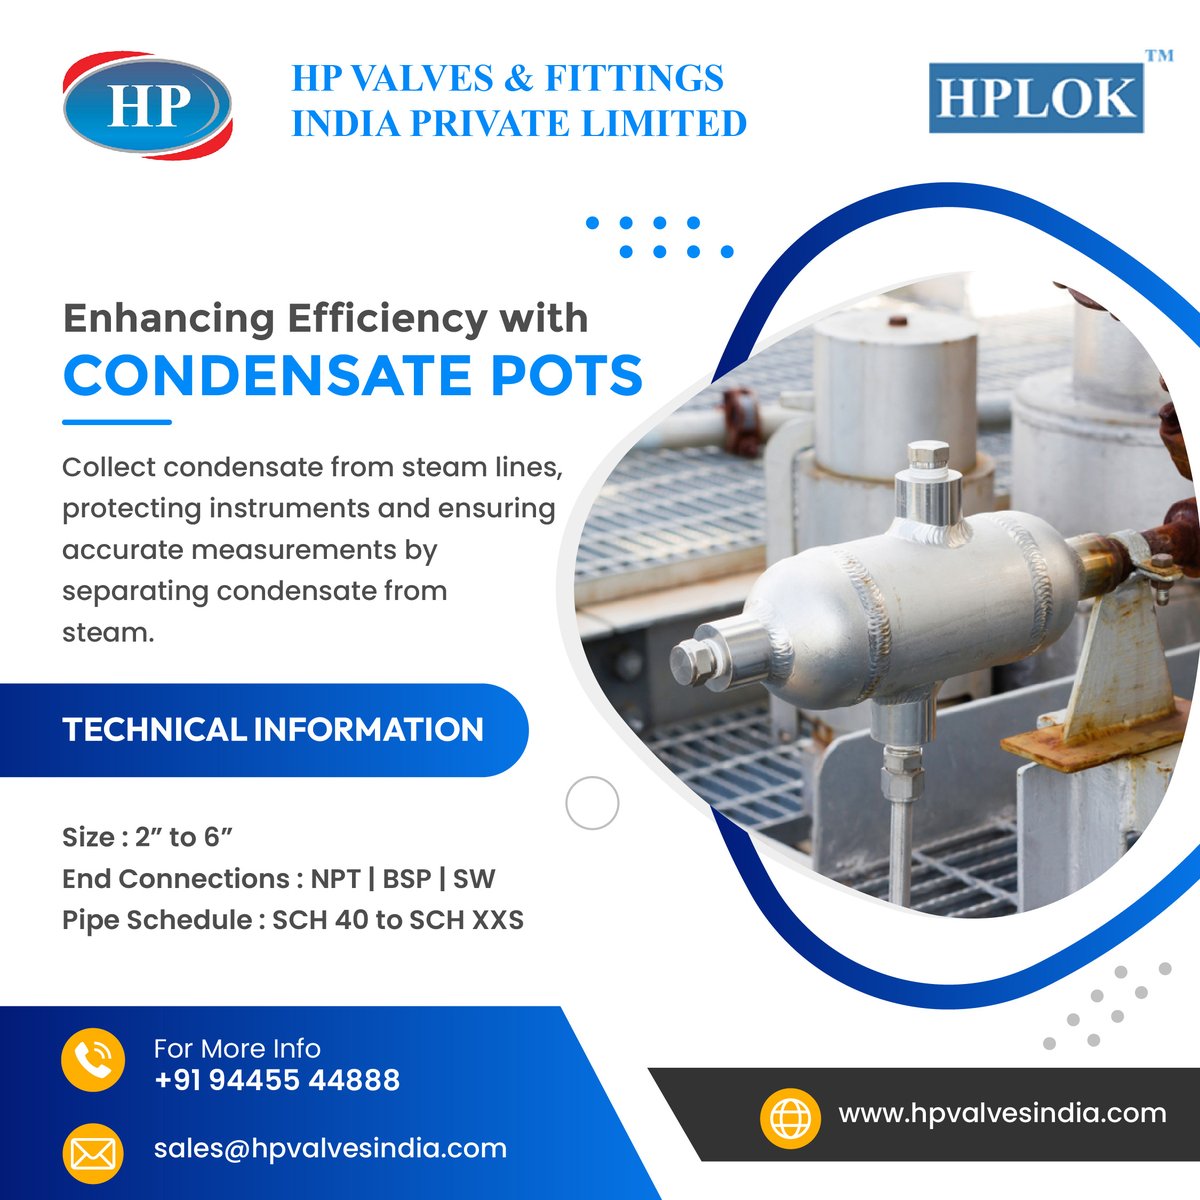 Streamline Your Operations: Condensate Pots Ensure Smooth Flow and Pressure Regulation.
#valves #oilandgas #oilindustry #manufacturing  #industry #hpvalves #Tubefitting #tube #design #ferrules #design #injectionquills
#oilandgasindustry #oilandgascompanies #onshore #offshore